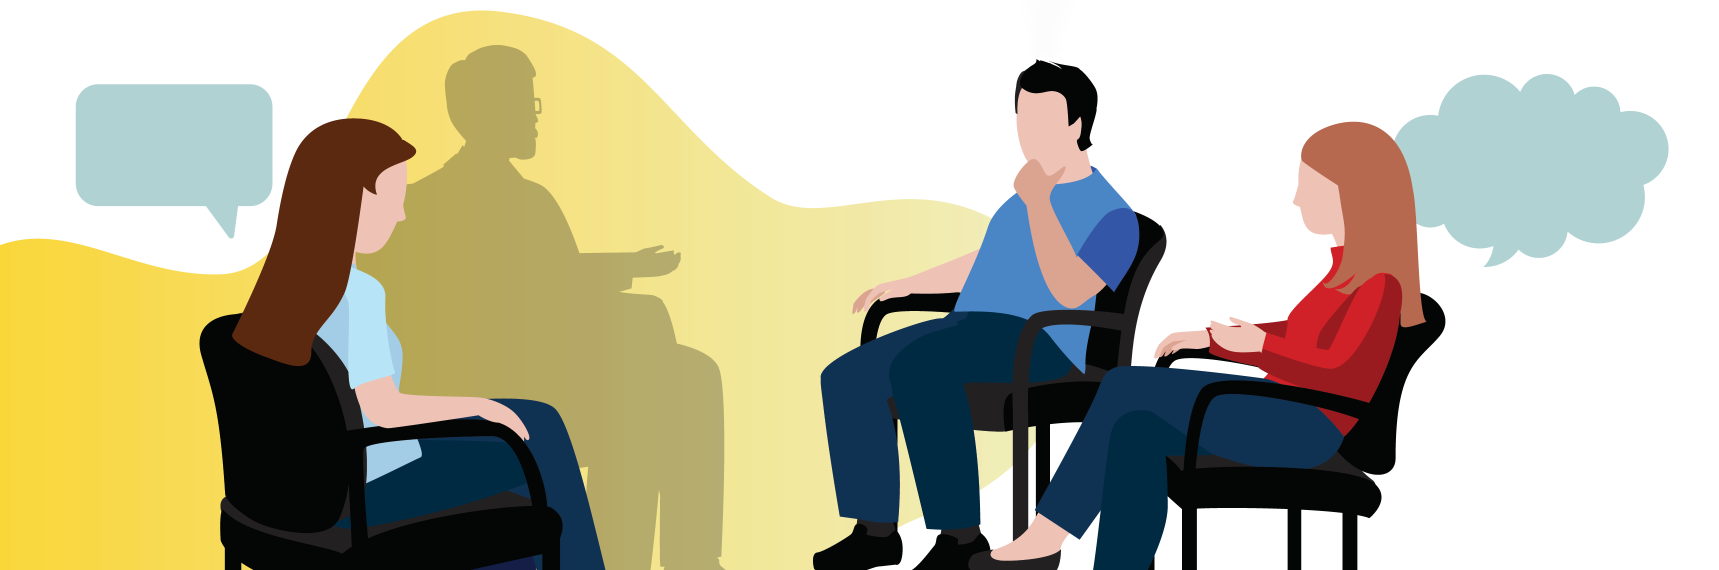 An abstract image illustrating people sitting in an interview